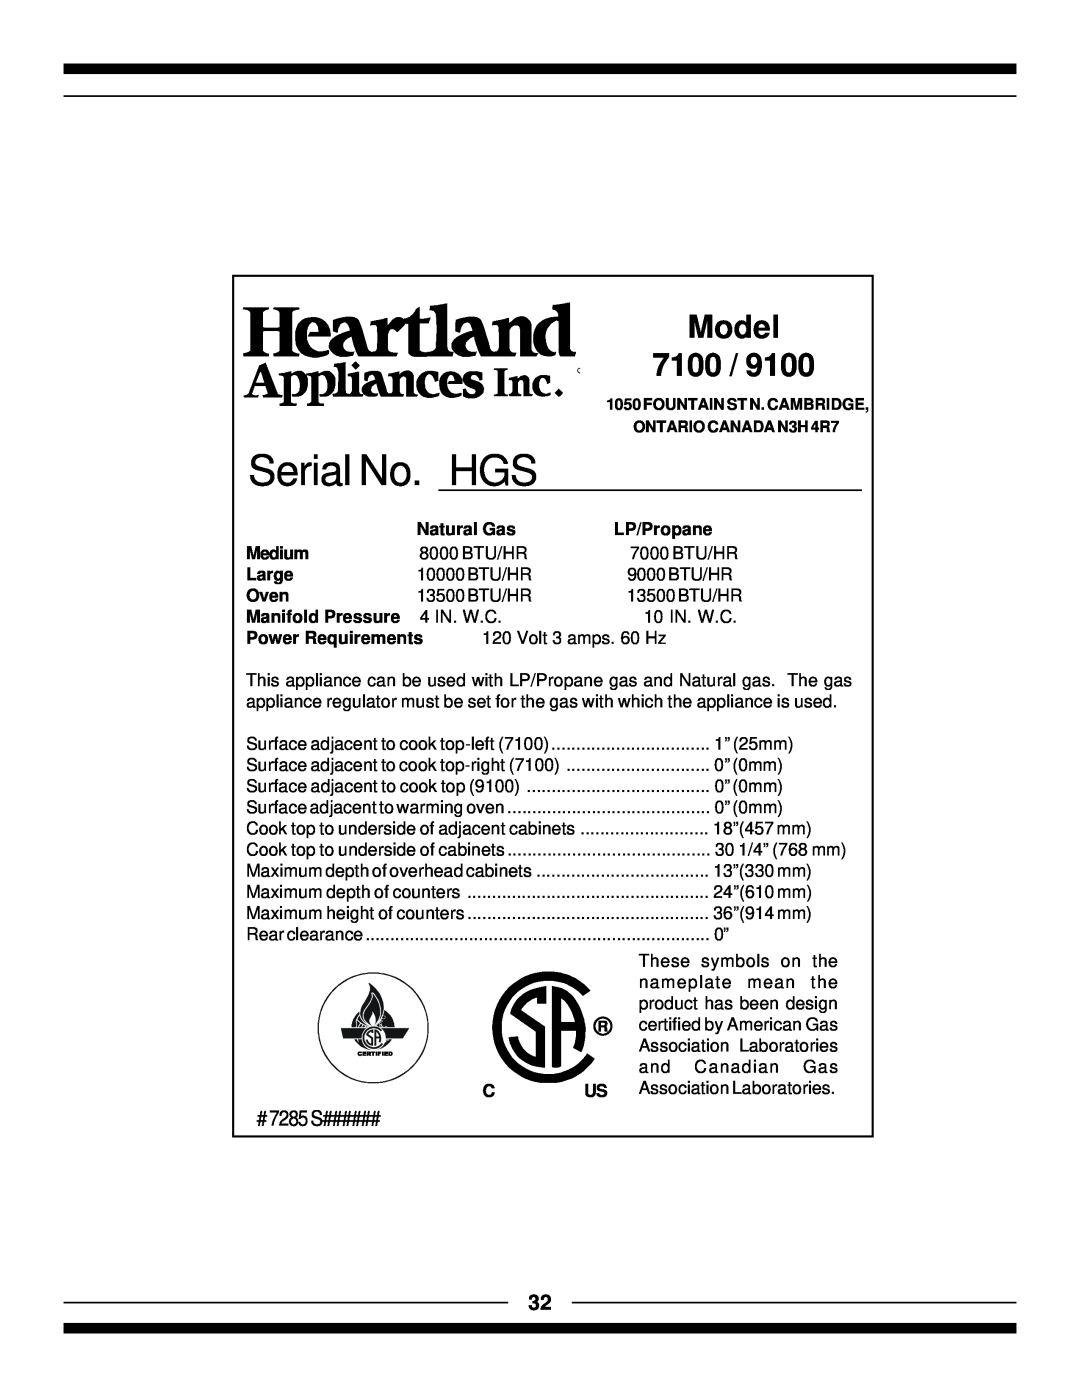 Hearth and Home Technologies 7100 Serial No. HGS, Model, Natural Gas, LP/Propane, Medium, Large, Oven, Manifold Pressure 